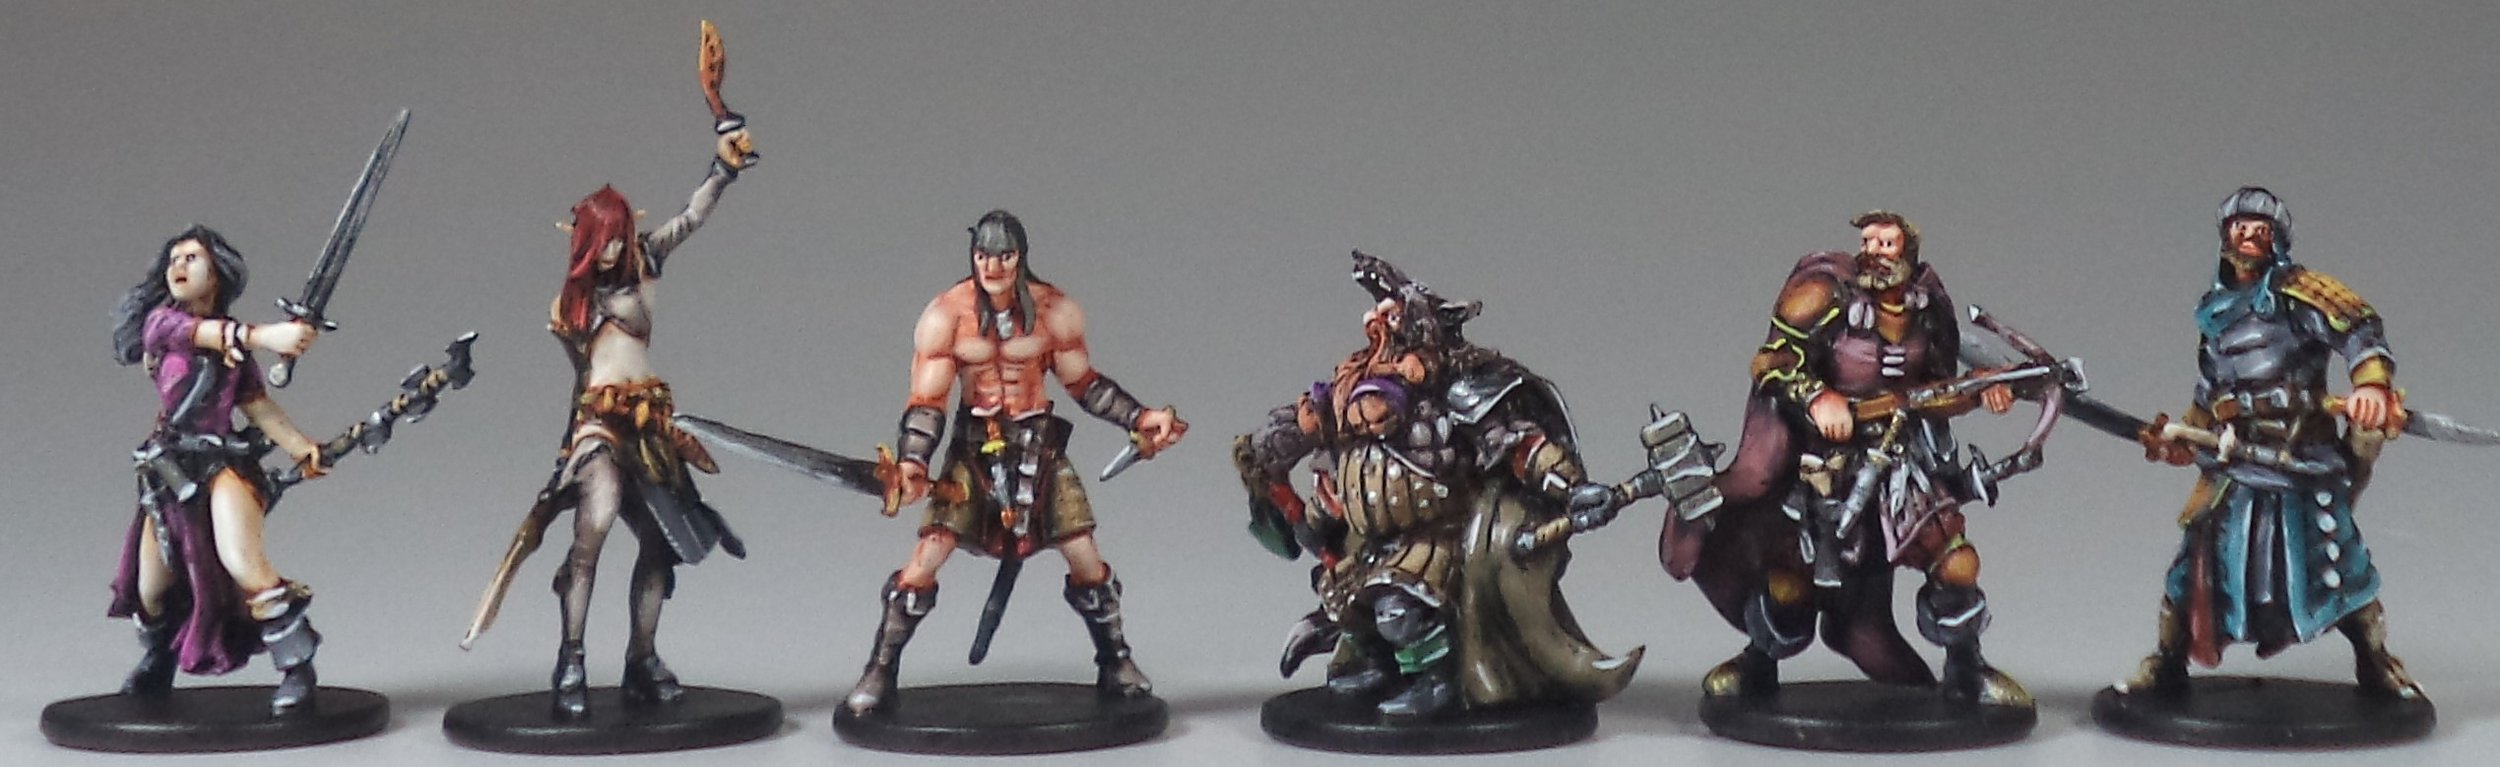 Miniature British Paintable Figurines - 5 Characters and Weapon